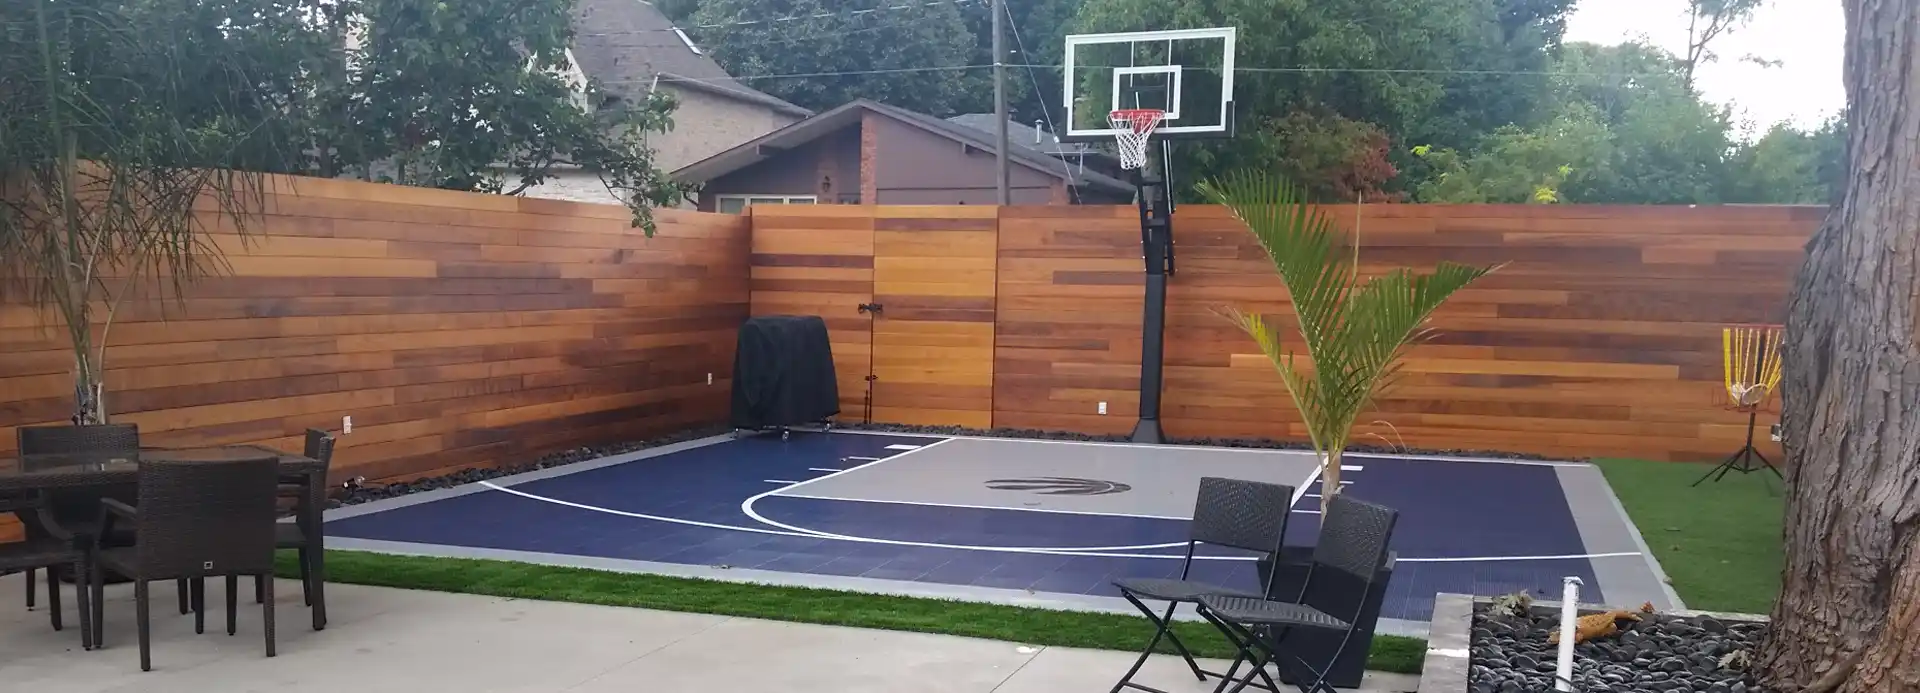 Basketball Backyard Court, with Reaptors design, in King City, ON